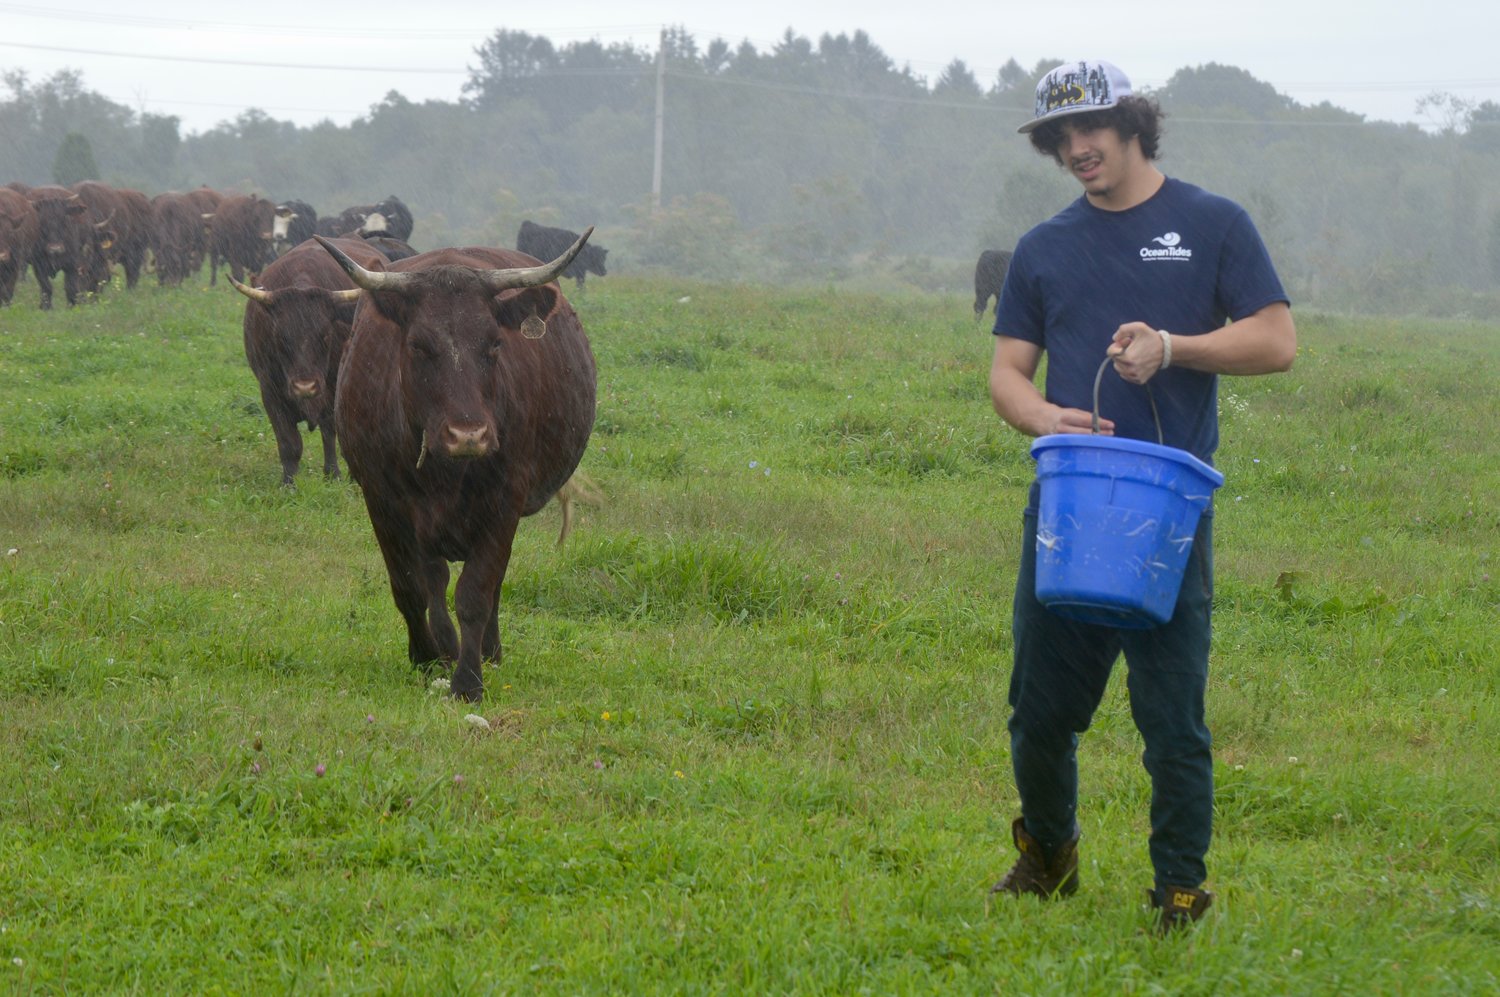 Herd leader Fern follows Austin, who’s carrying a bucket full of feed and molasses. Students successfully managed to move the herd to the fall grazing field, which was fully of long, lush grass.